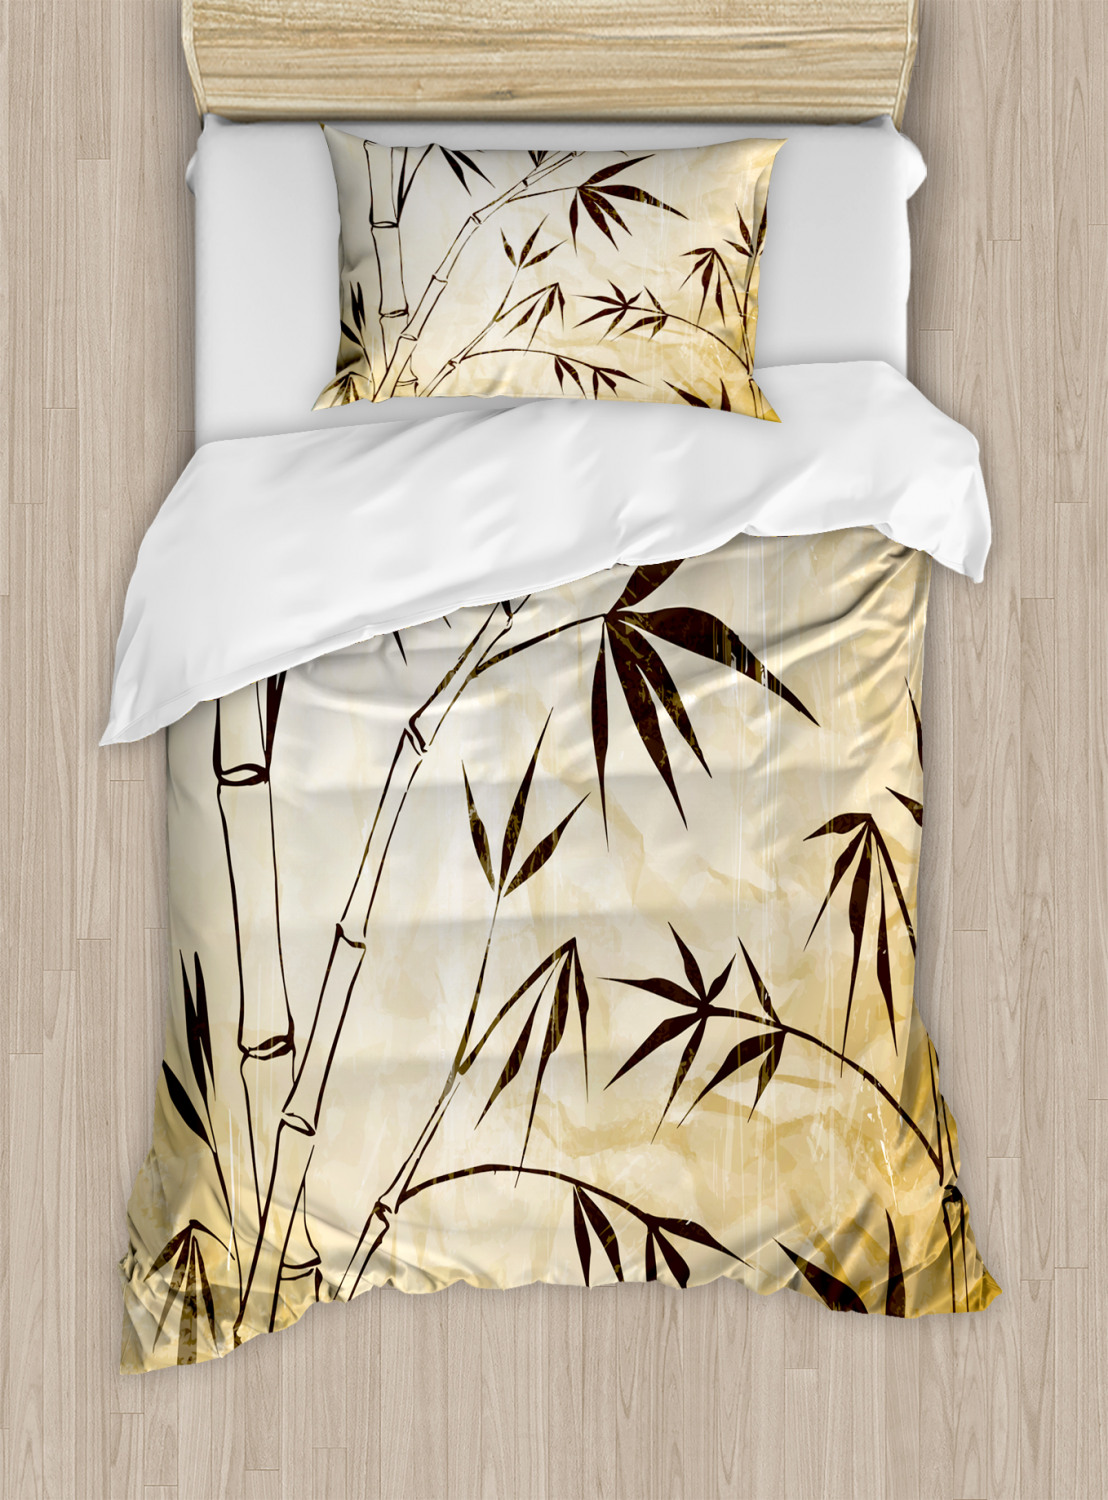 Grey Duvet Cover Set with Pillow Shams Traditional Bamboo Leaves Print 